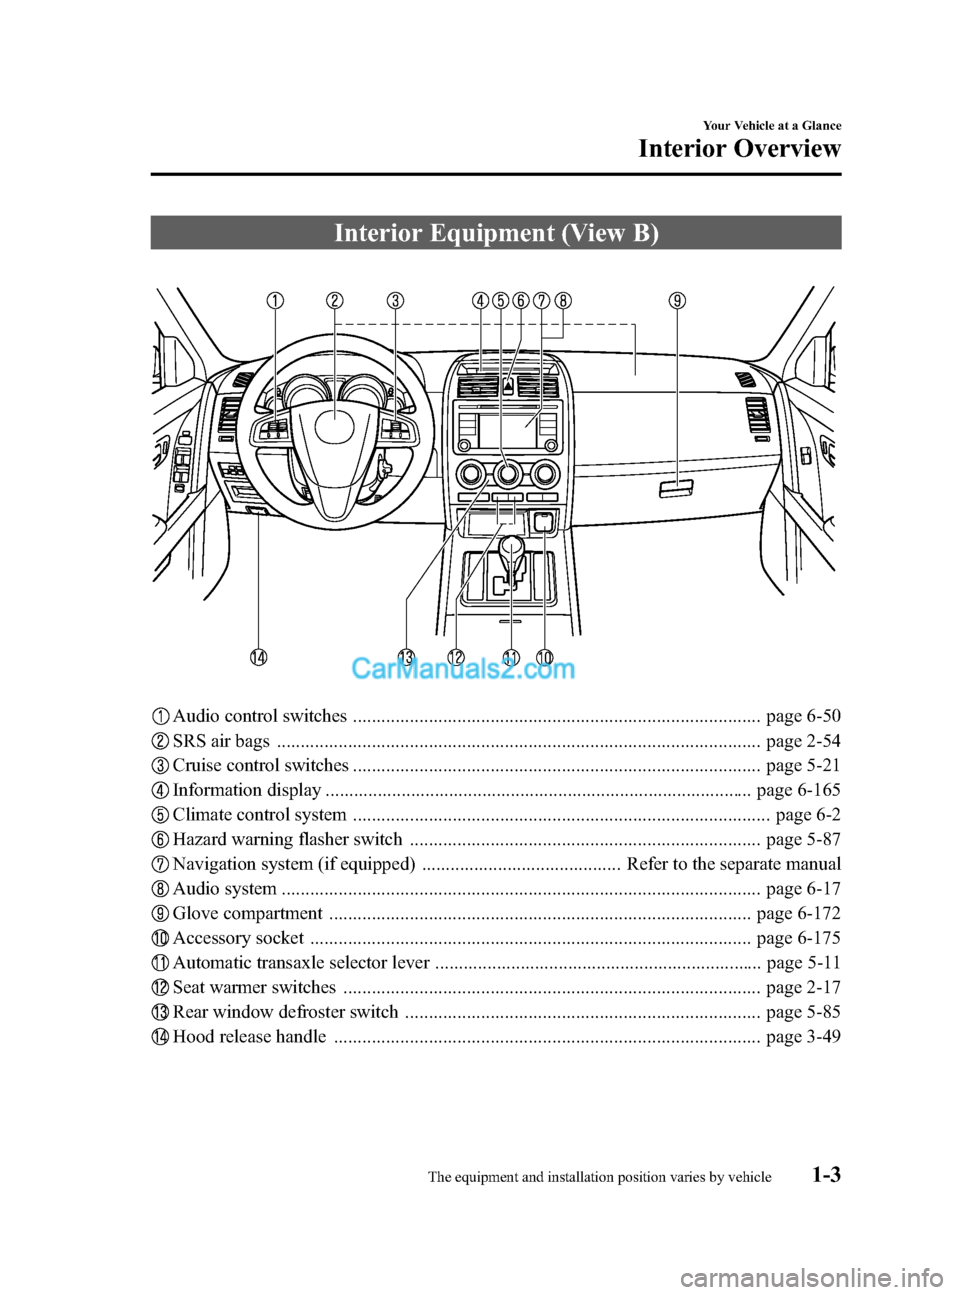 MAZDA MODEL CX-9 2014  Owners Manual (in English) Black plate (9,1)
Interior Equipment (View B)
Audio control switches ...................................................................................... page 6-50
SRS air bags .....................